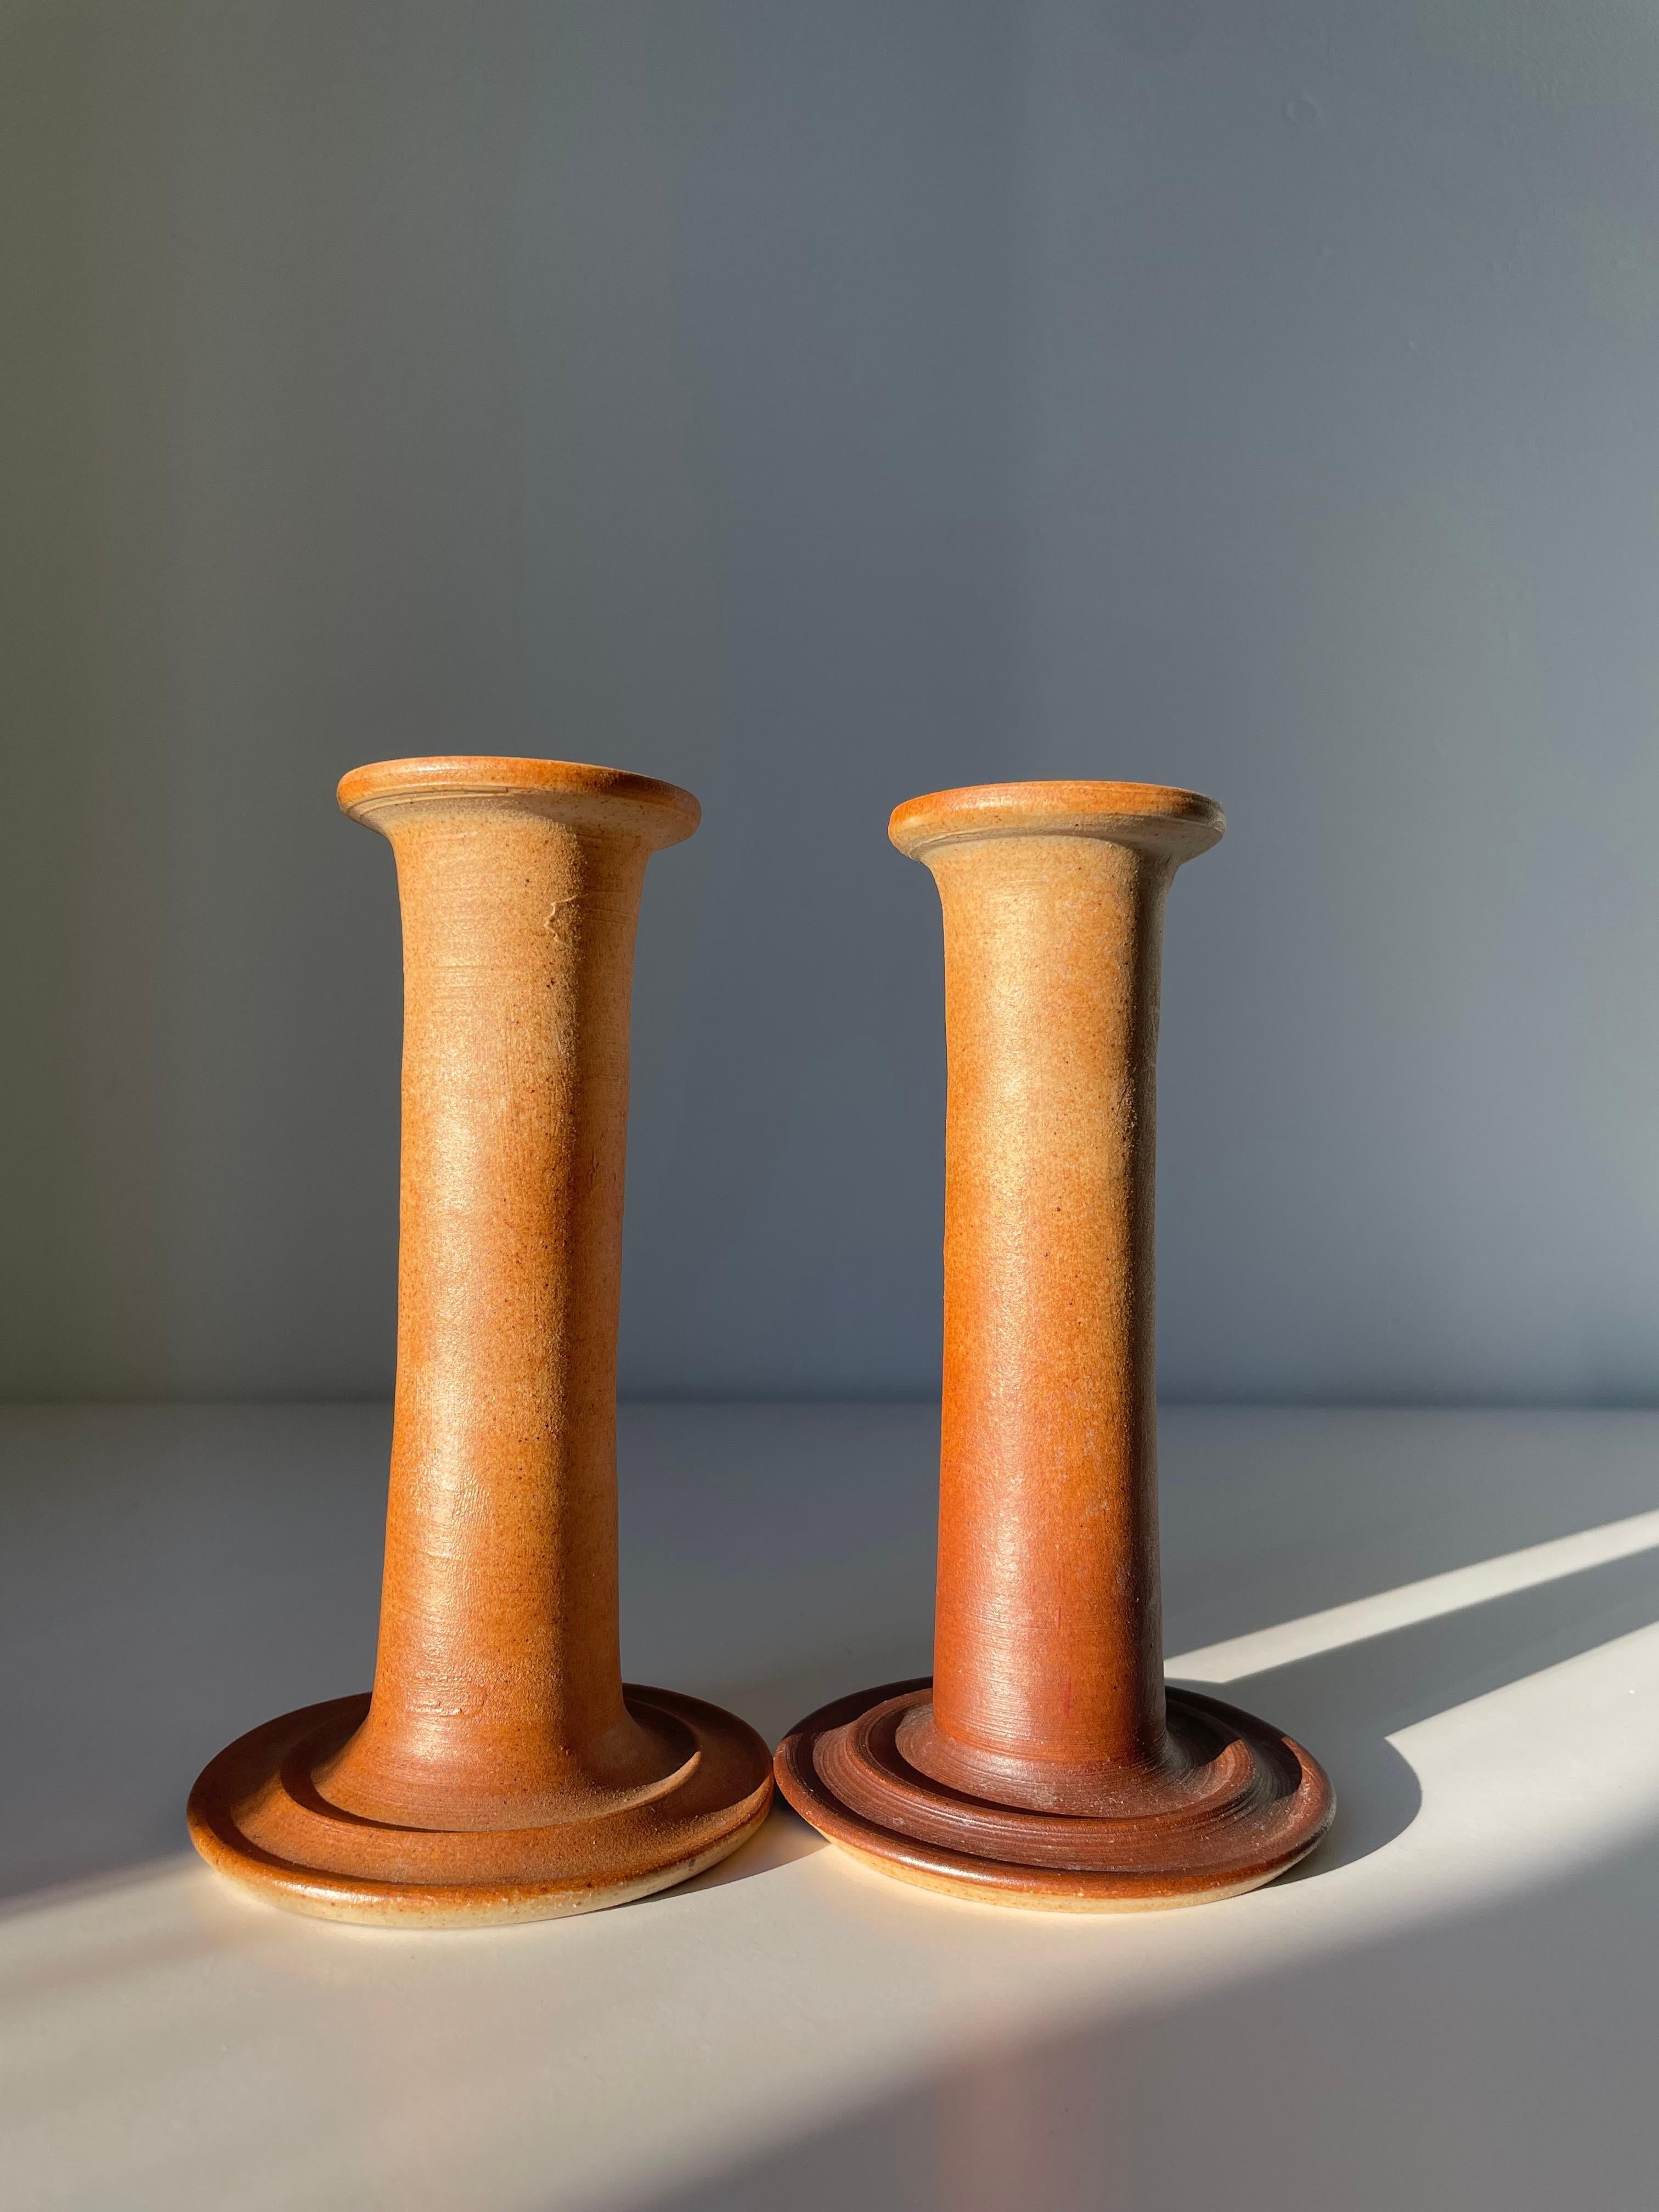 Pair of J. Packness Tawny Ceramic Candle Sticks, 1970s For Sale 4